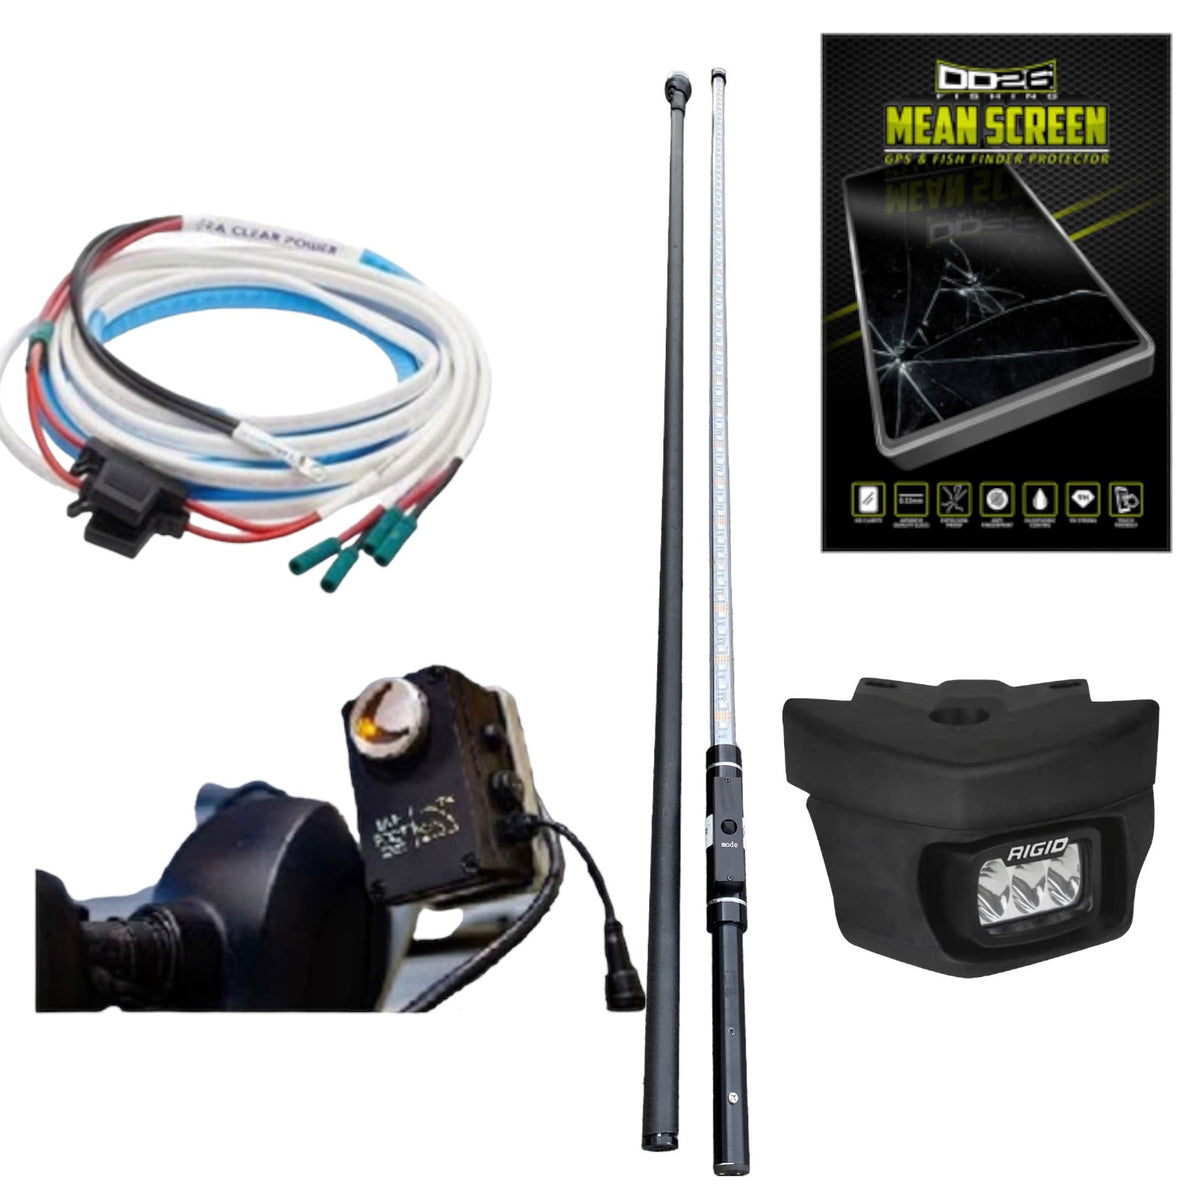 Electronic Accessories, Lights and Live Foot – Tagged Boat Lights – DD26  Fishing